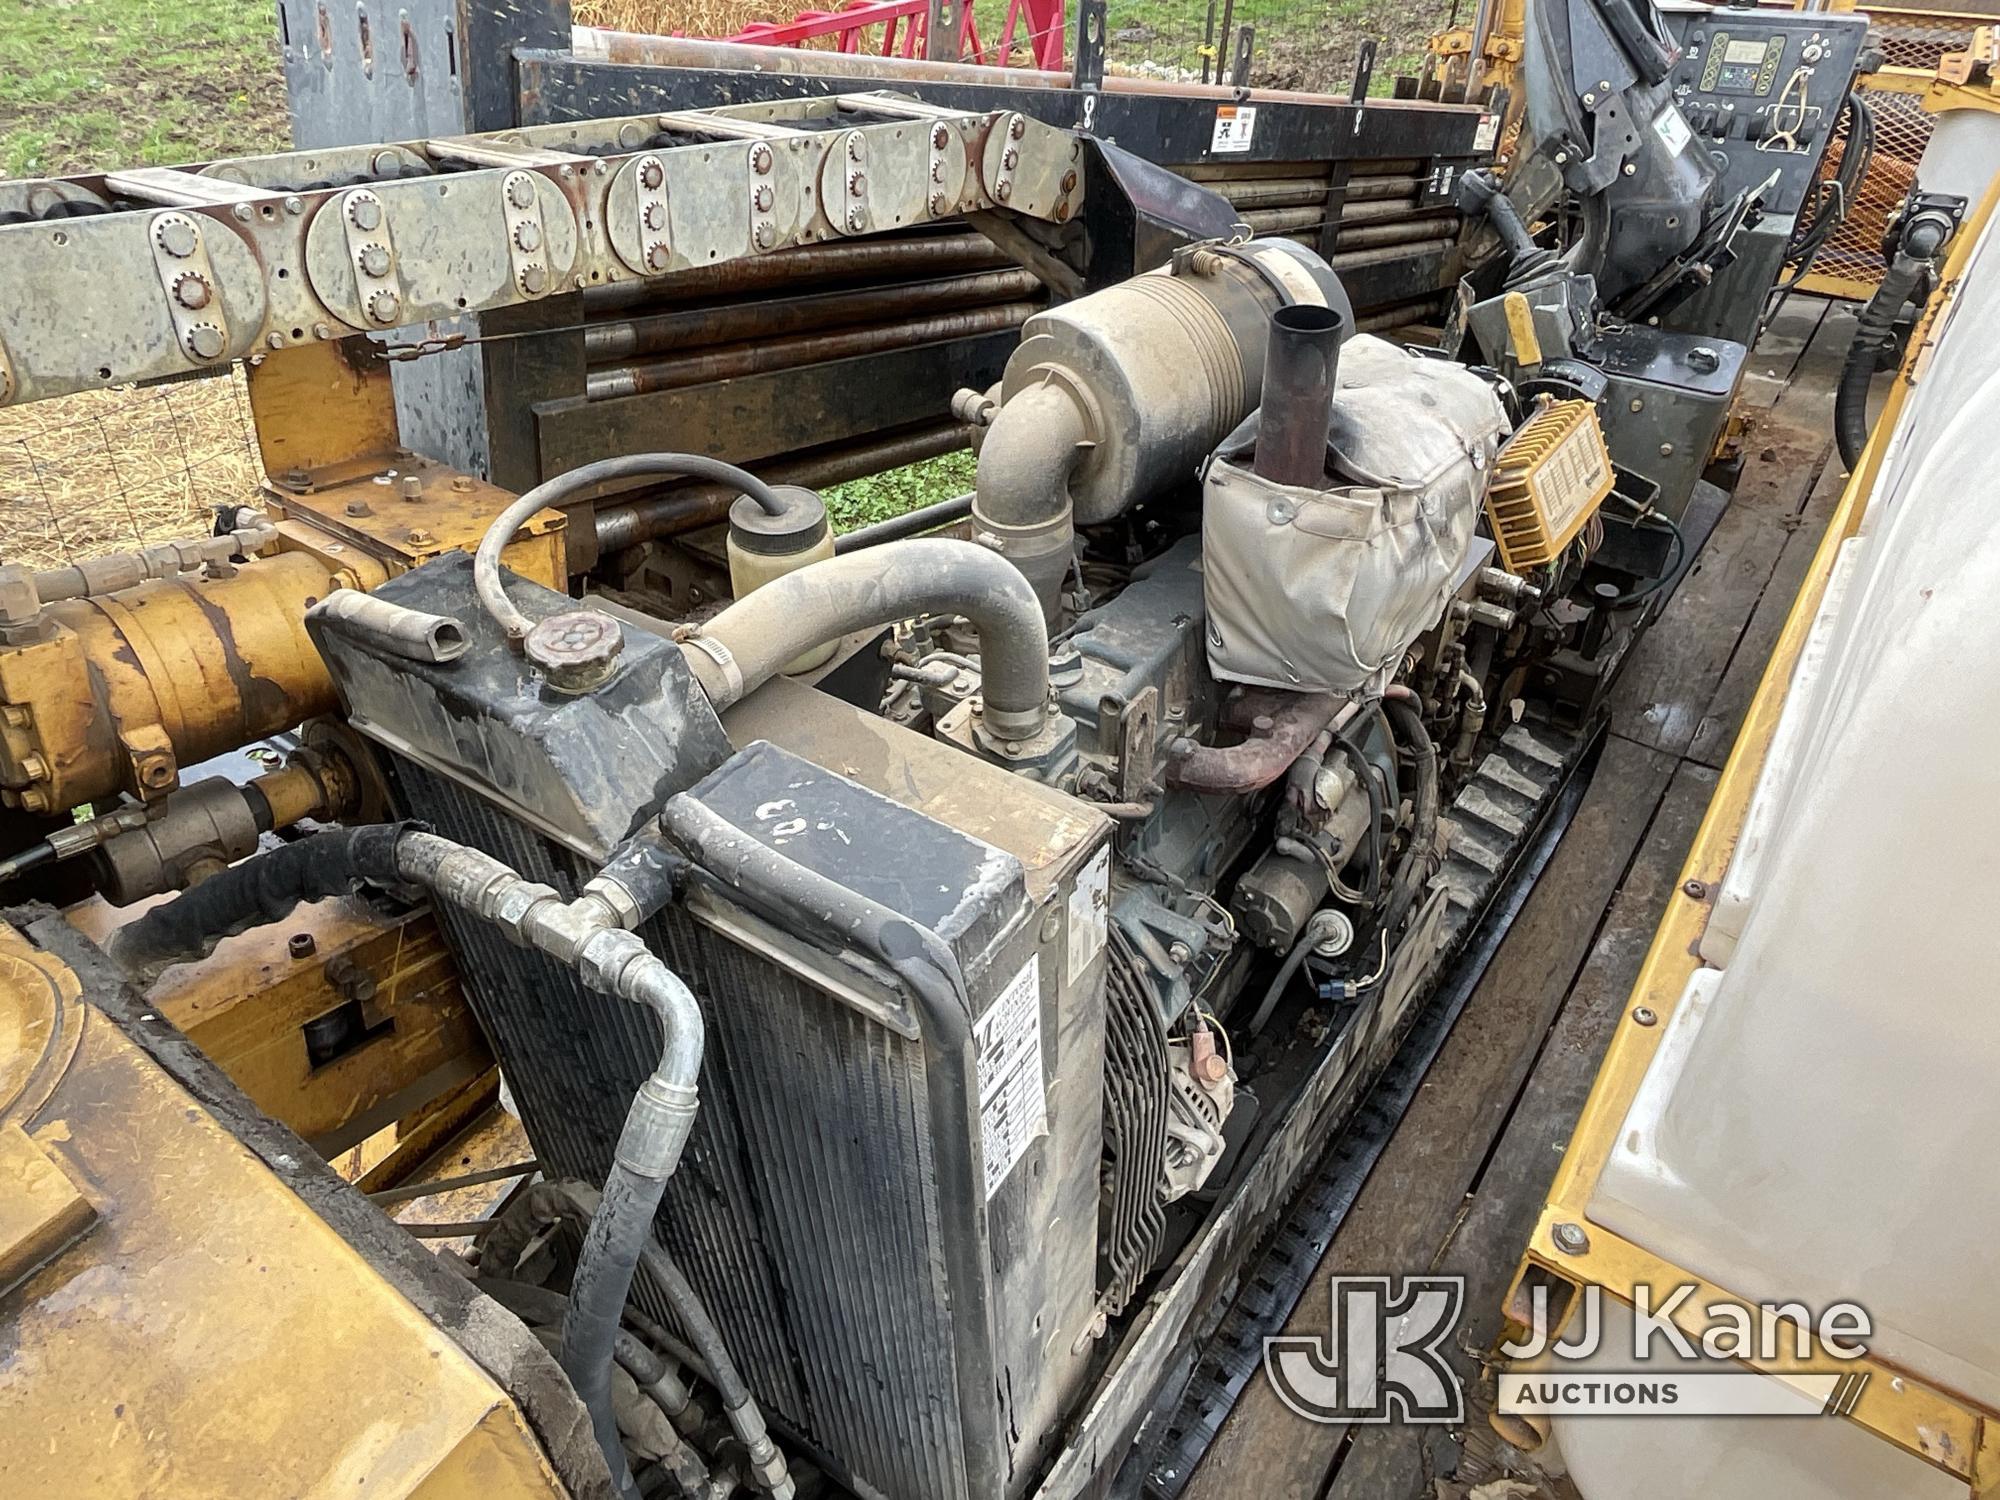 (Orleans, IN) 2008 Vermeer D16x20 Series II Directional Boring Machine, To Be Sold with Lot# t6590 (